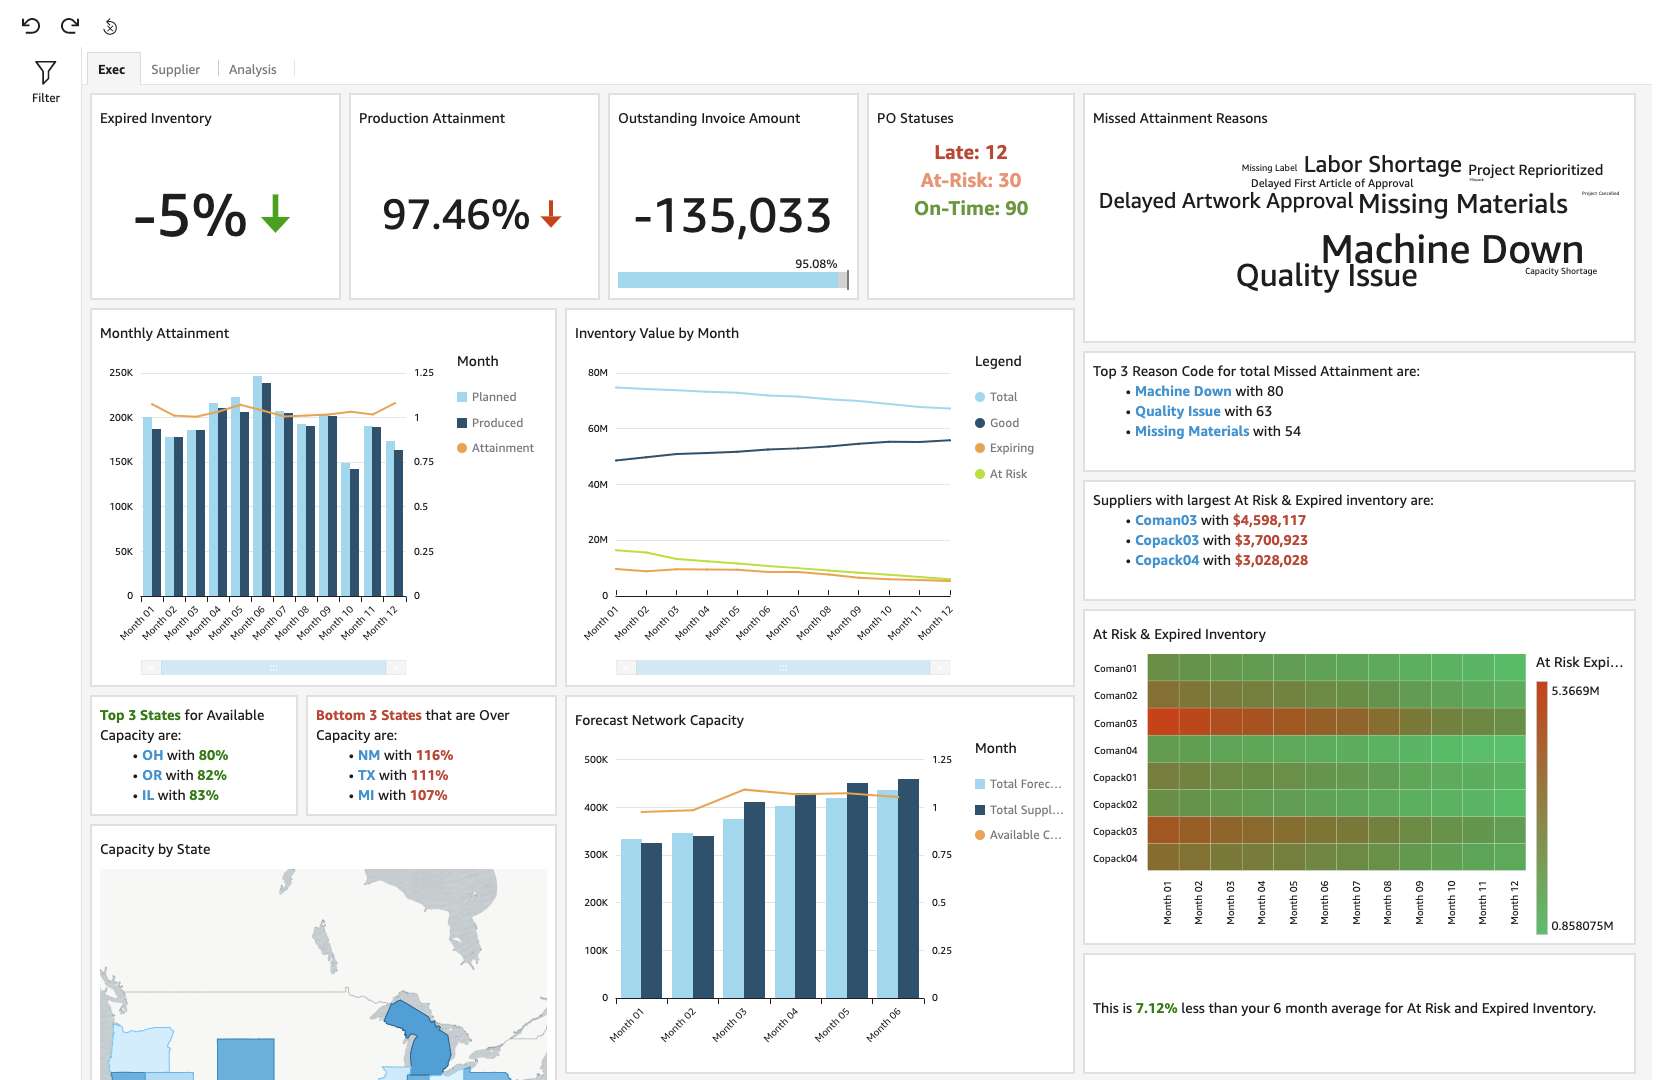 Executive Dashboard that includes expired inventory, production attainment, outstanding invoice amount, PO statuses, missed attainment reasons, monthly attainment graph, inventory value by month graph, at risk/expired inventory, and more!